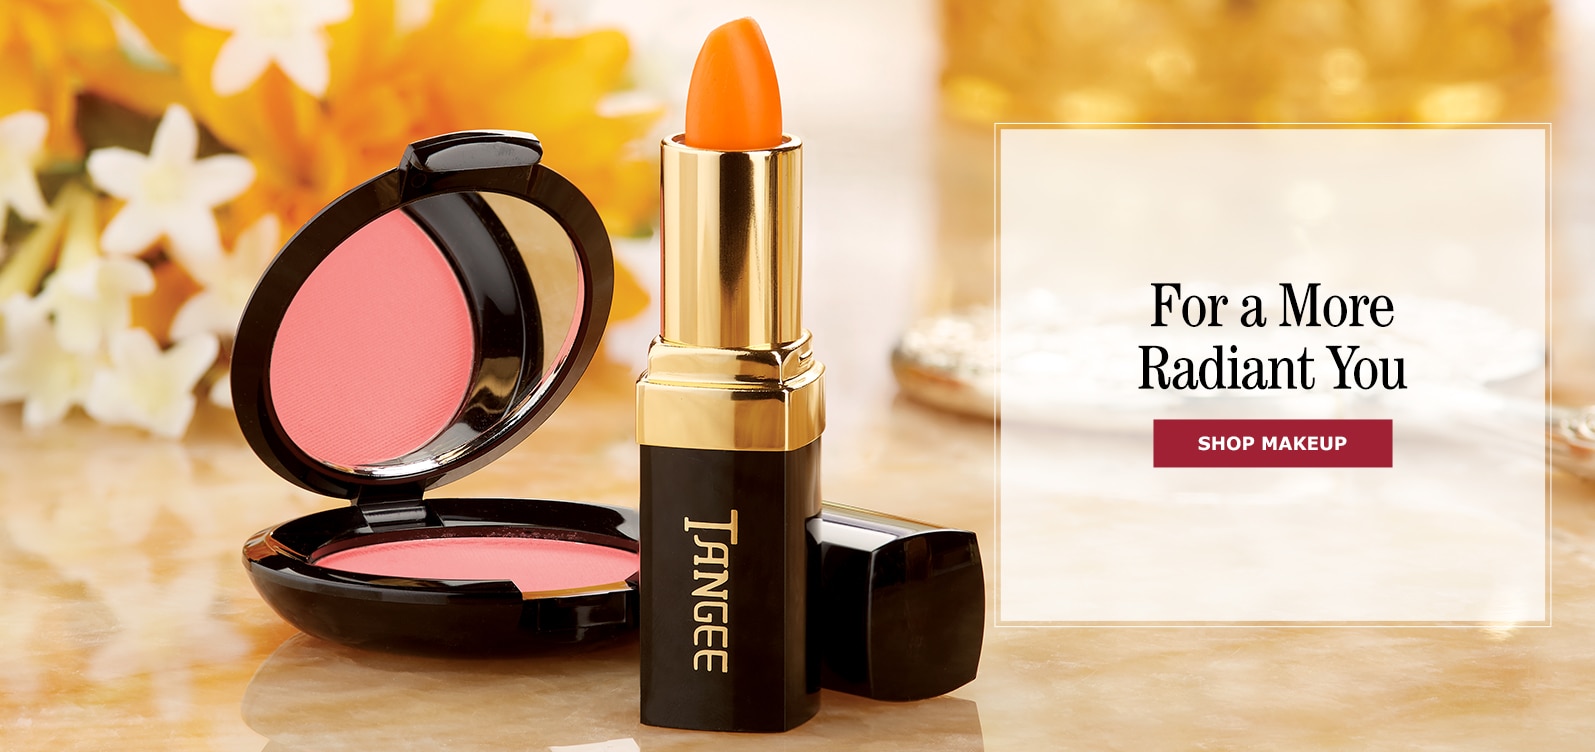 For a More Radiant You. Shop Makeup